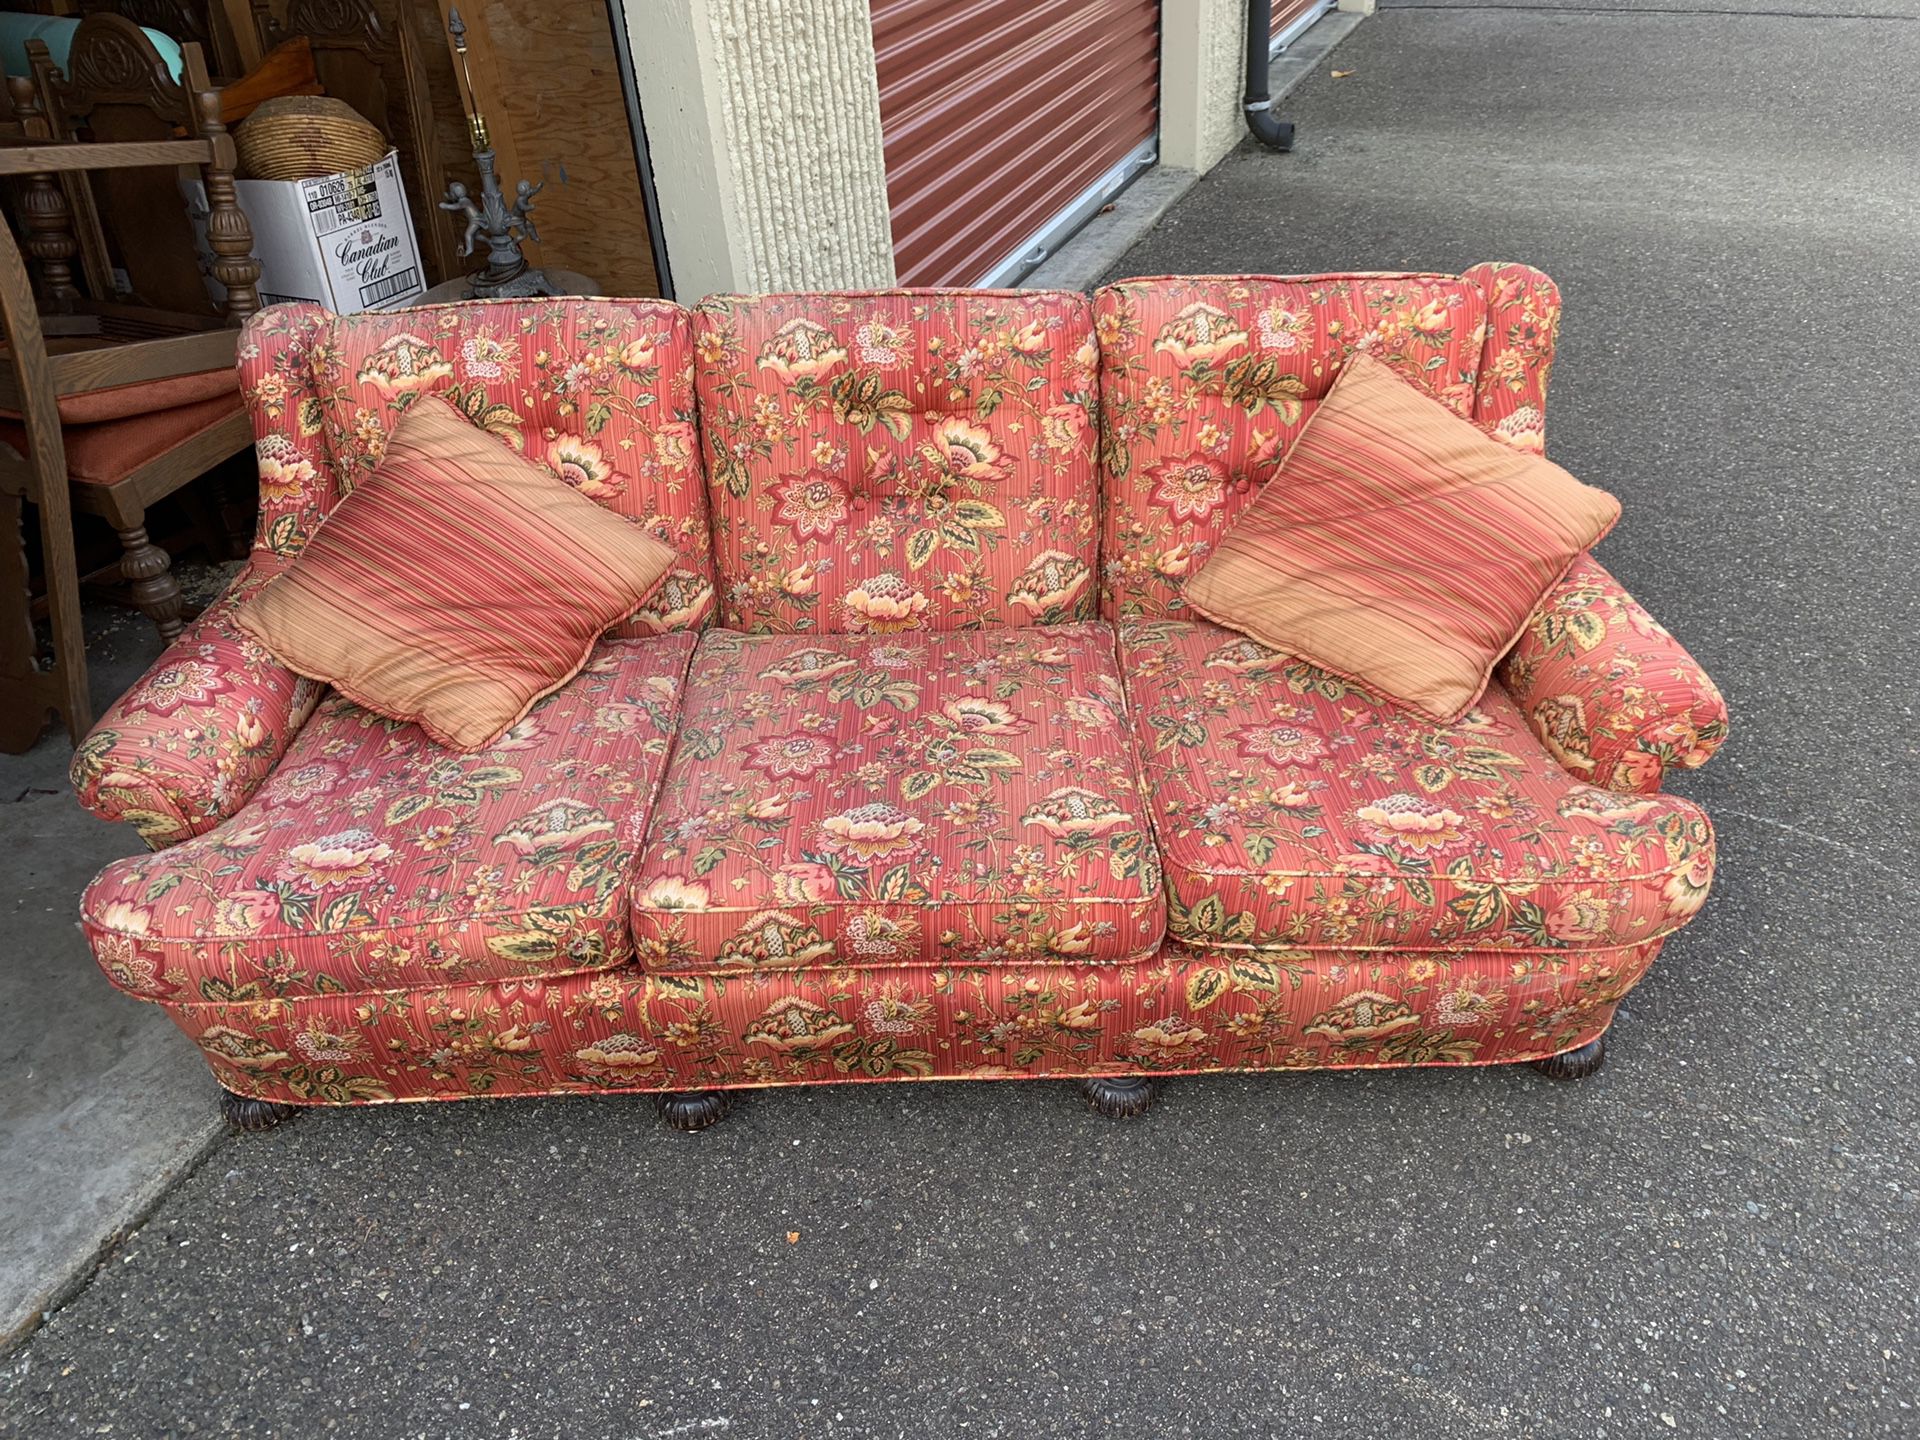 Nice old couch.